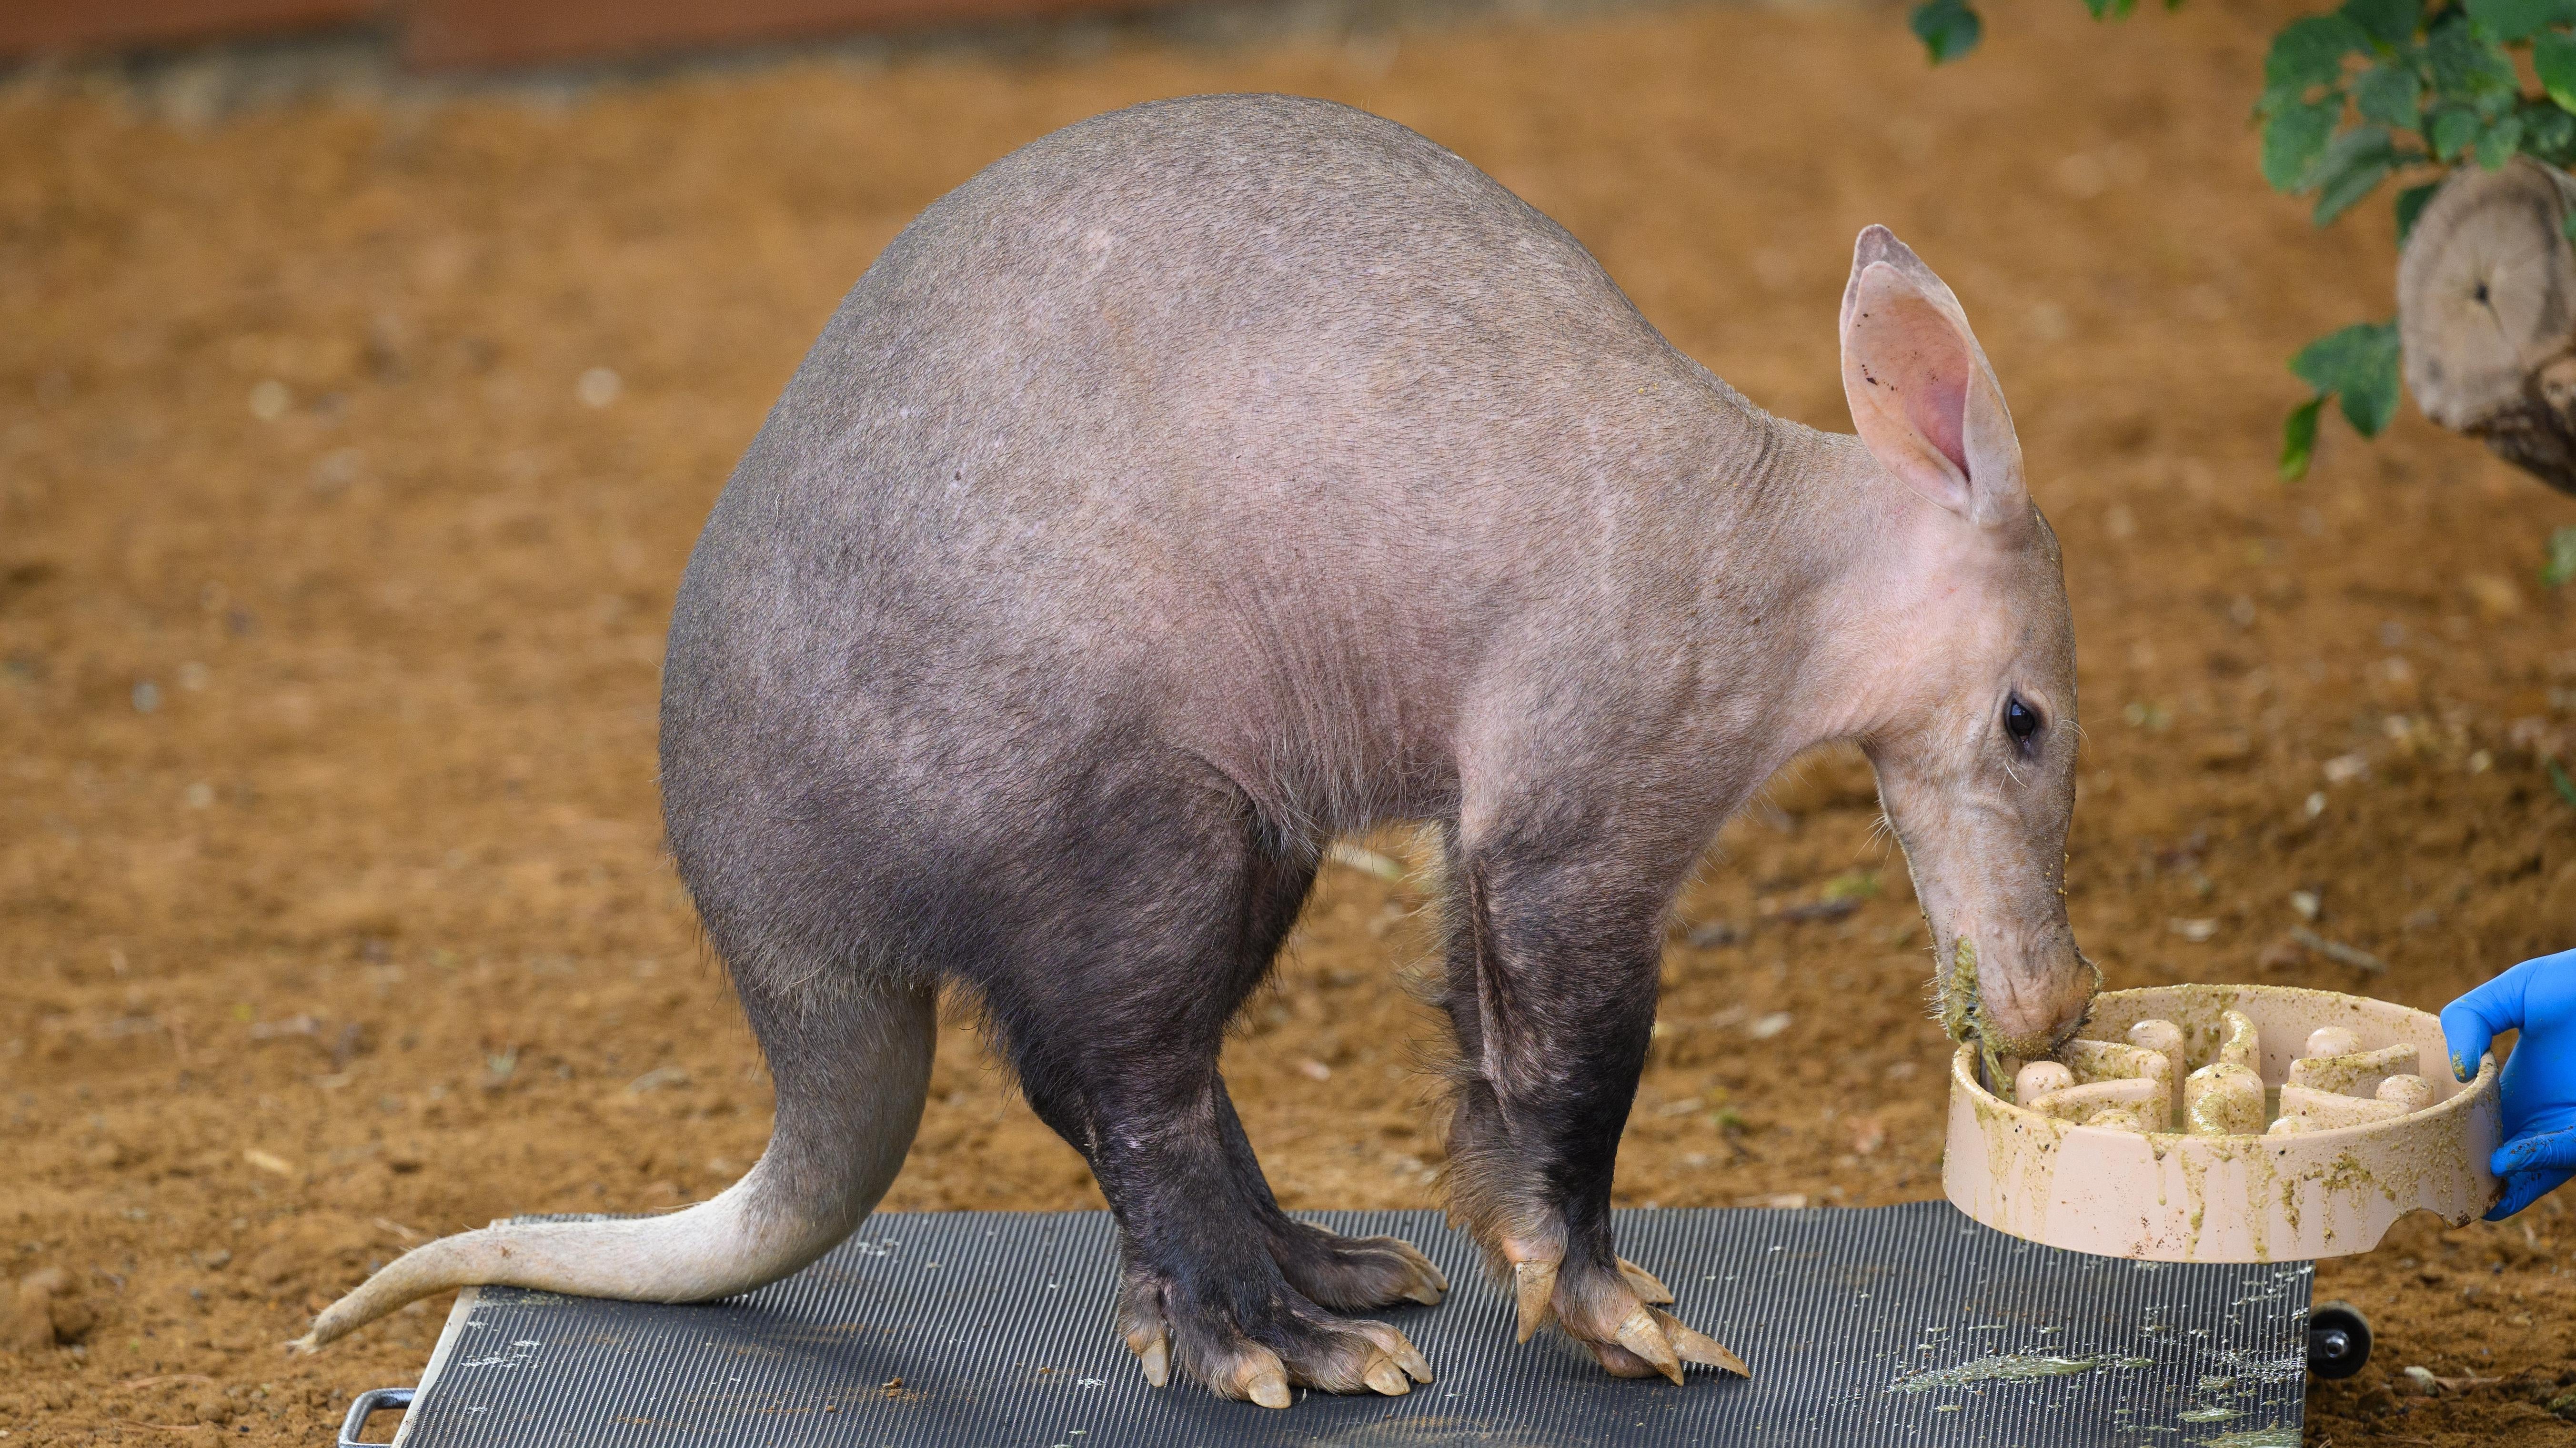 An aardvark getting weighed. (Photo: Leon Neal, Getty Images)